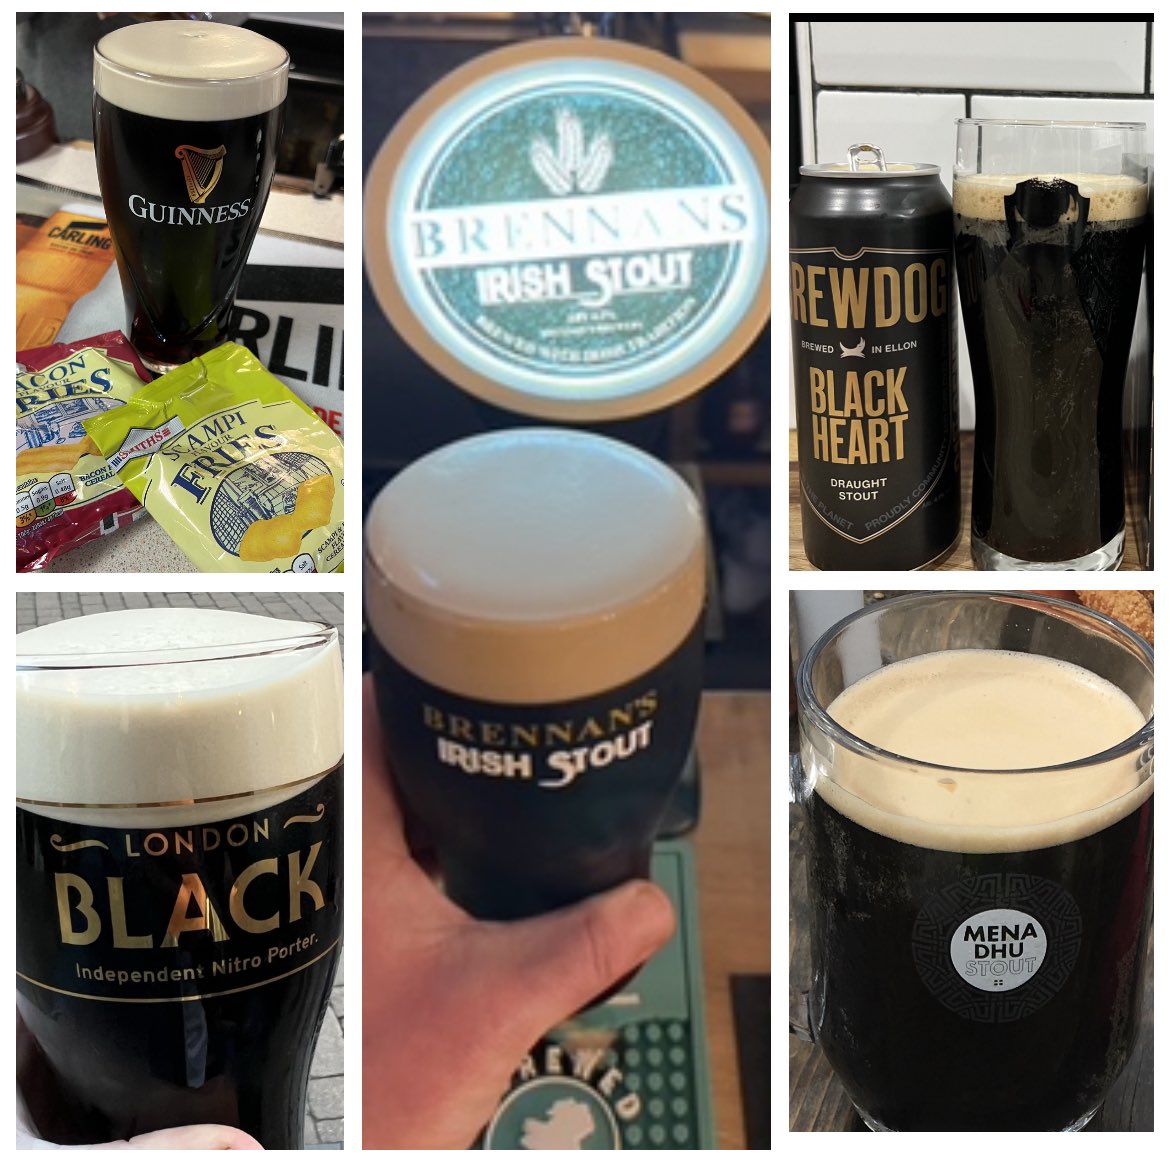 Move over lager & cider (and maybe even real ale) Britain is about to have a Stout Summer ☀️🖤🇬🇧 #stout @AnspachHobday #anspachandhobday @GuinnessGB #guinness @StAustellBrew #menadhu @BrewDog #brewdog @BrennansBrewery #brennansbrewery